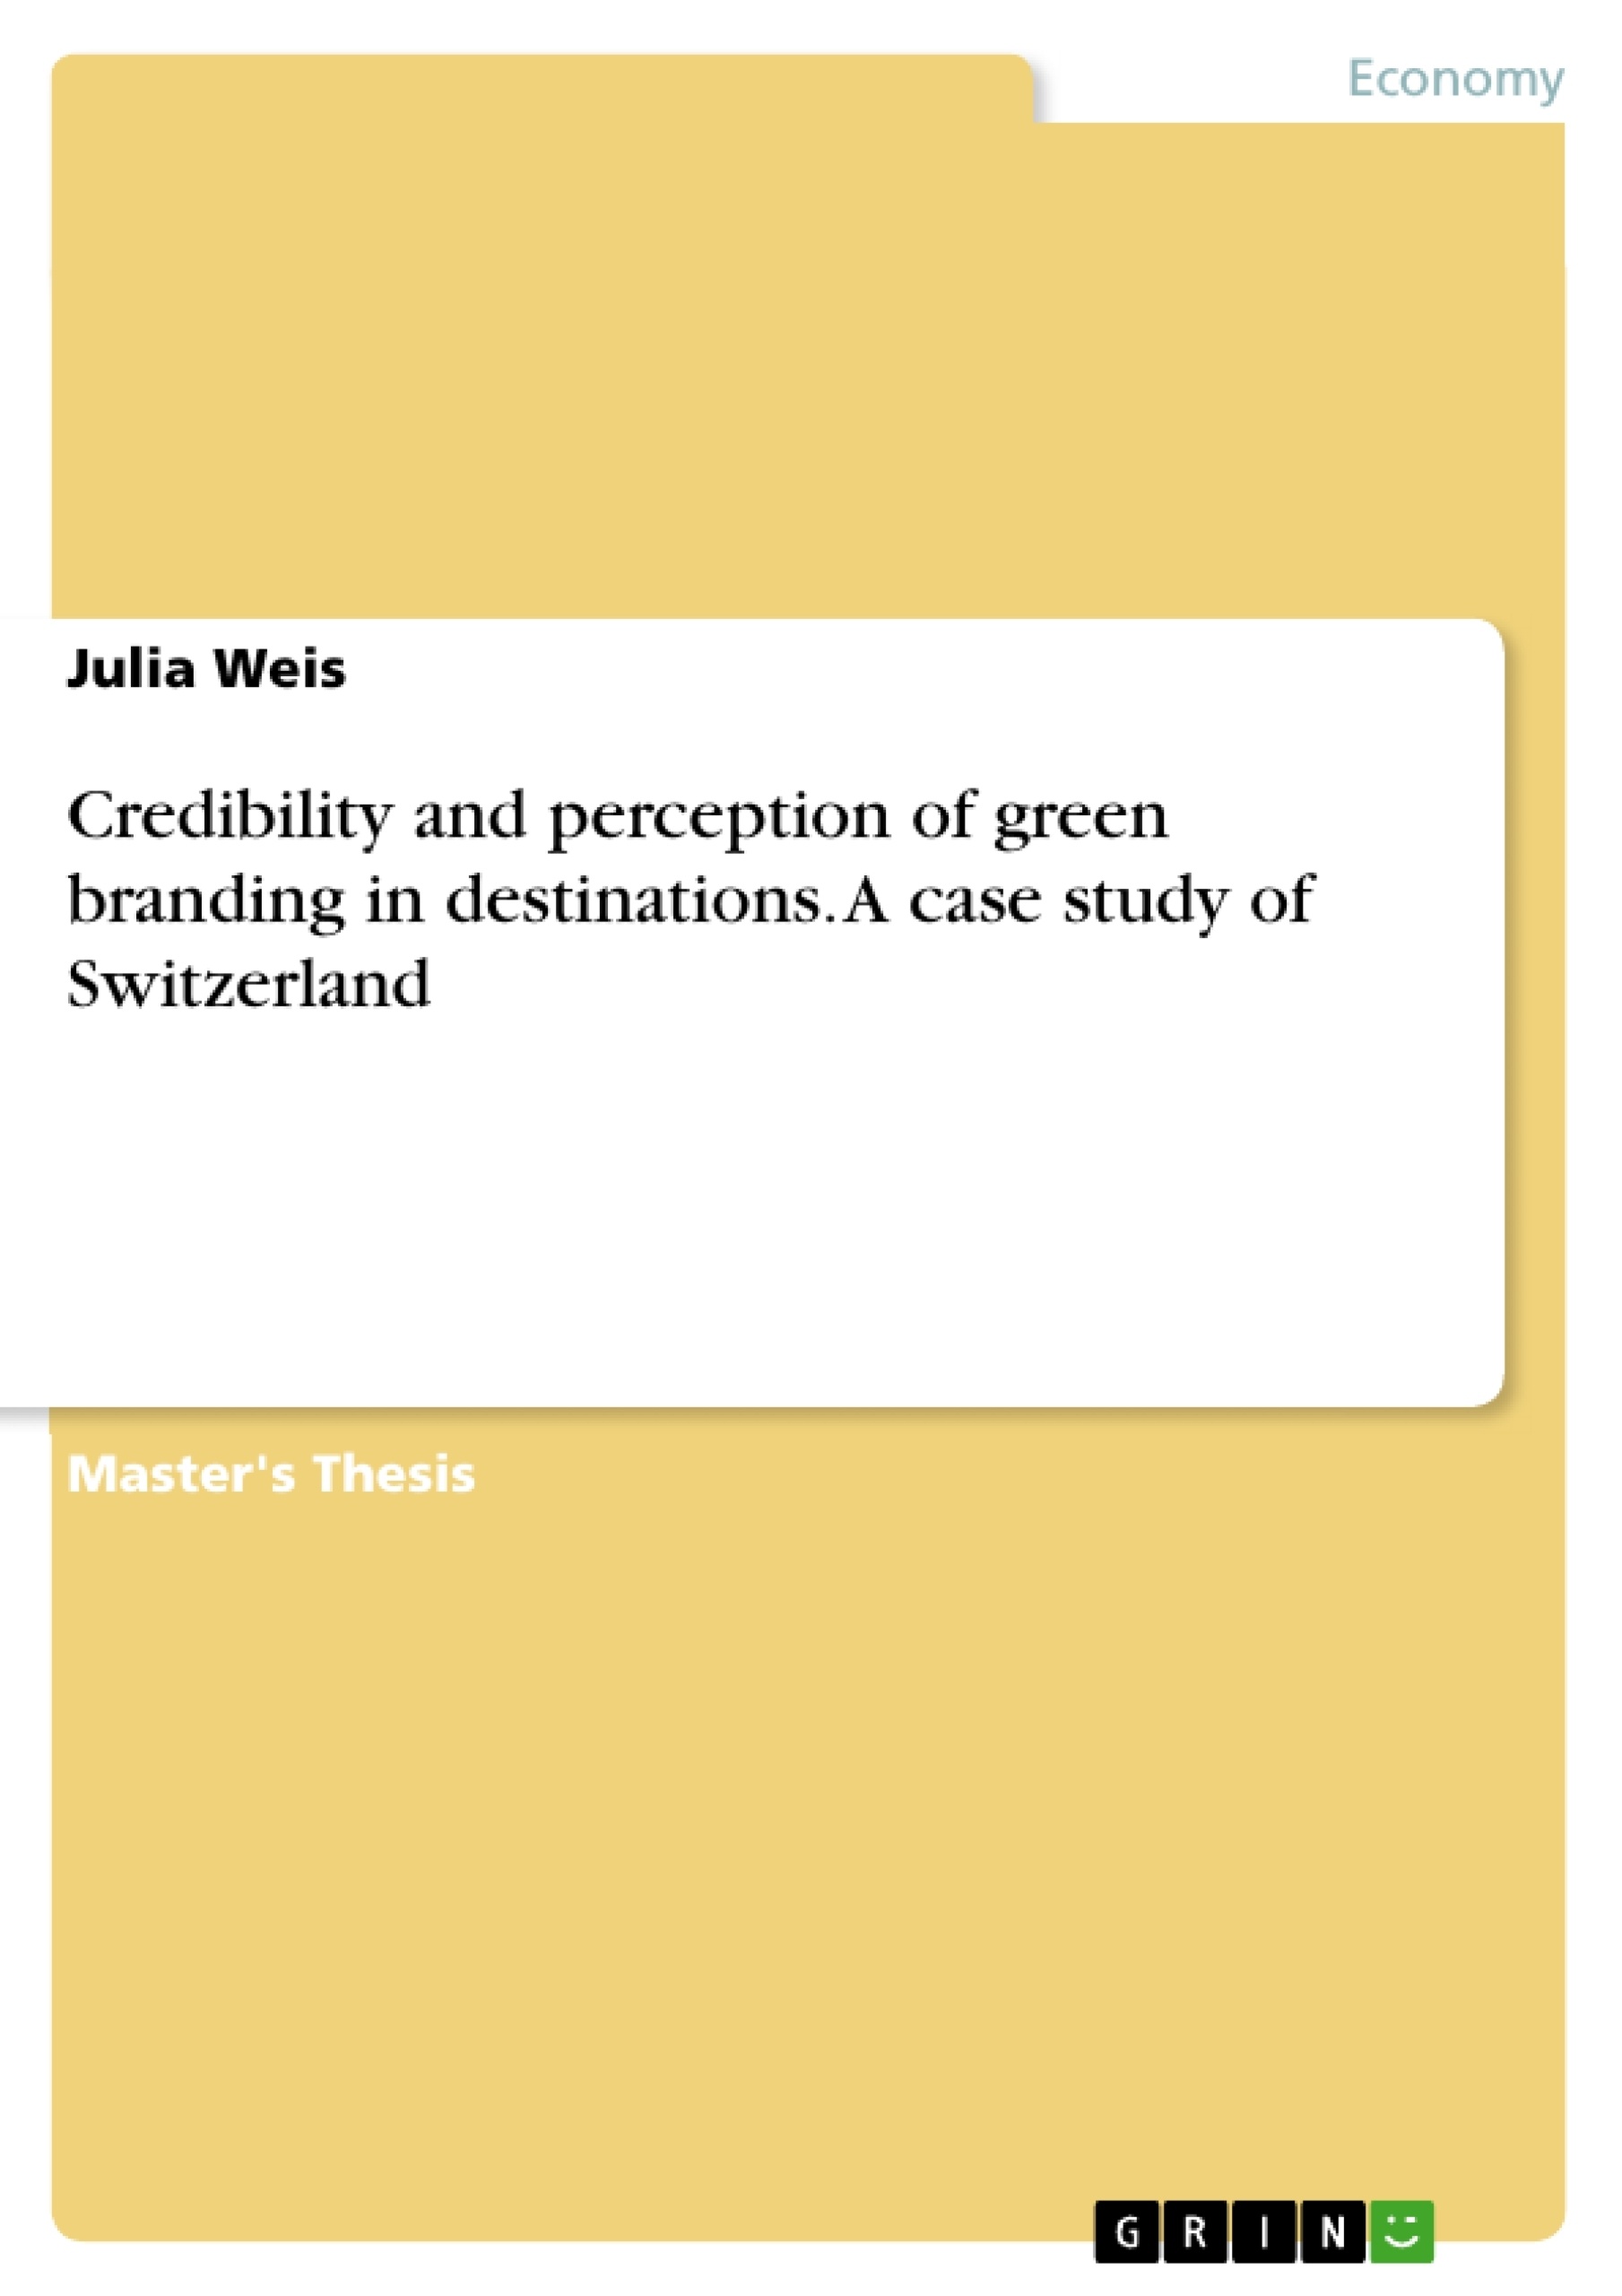 Title: Credibility and perception of green branding in destinations. A case study of Switzerland